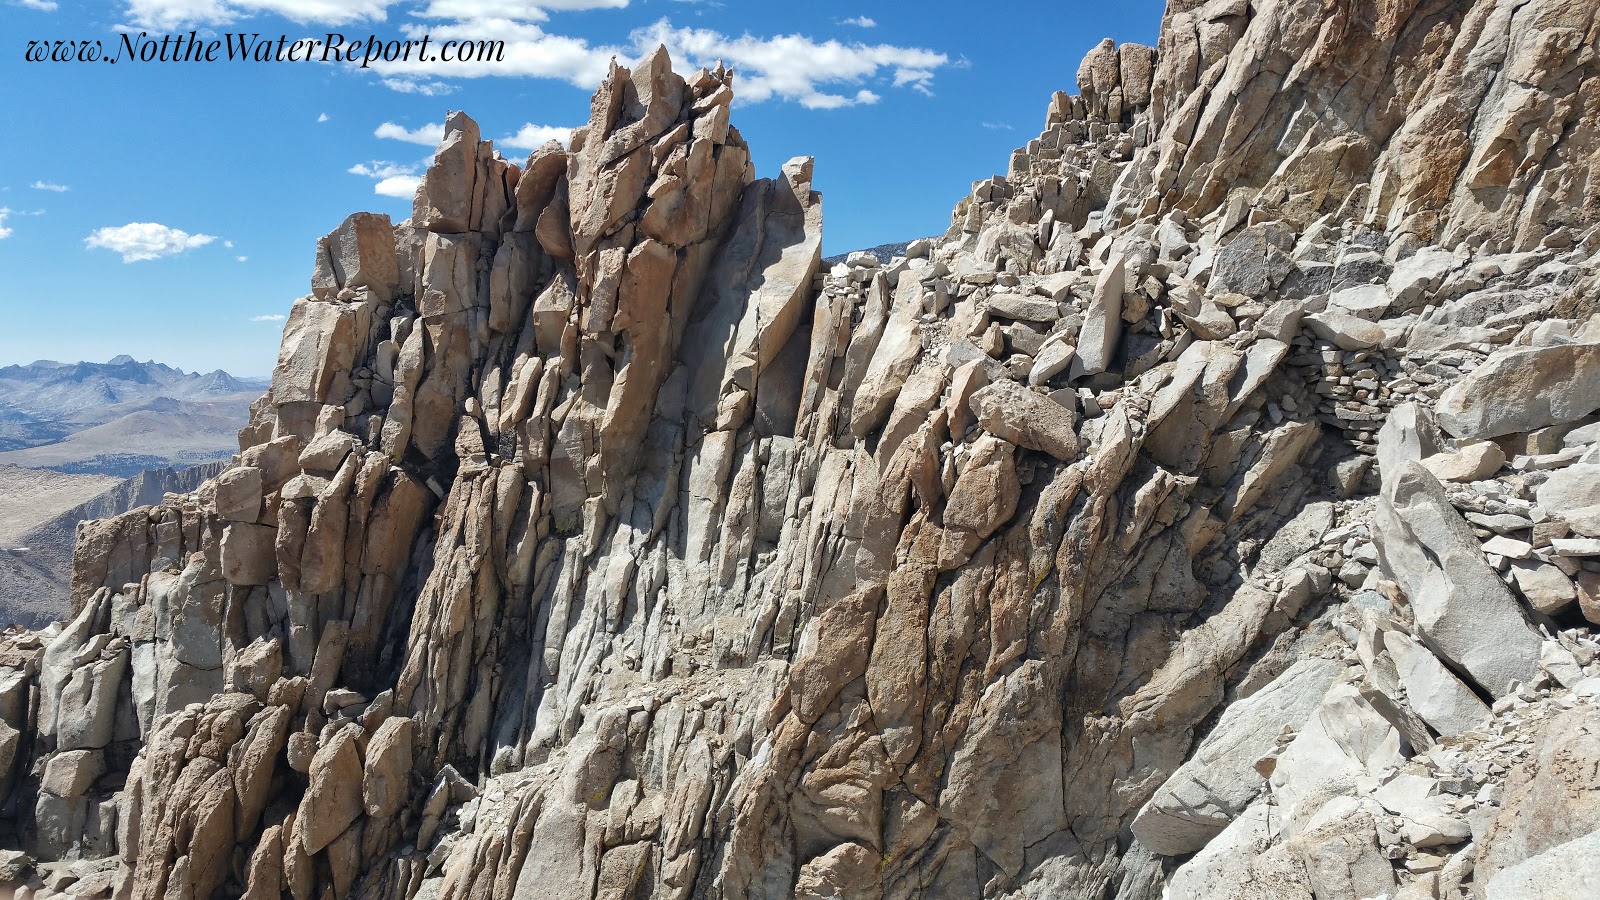 A Rocky outpost on the trail to Mount Whitney